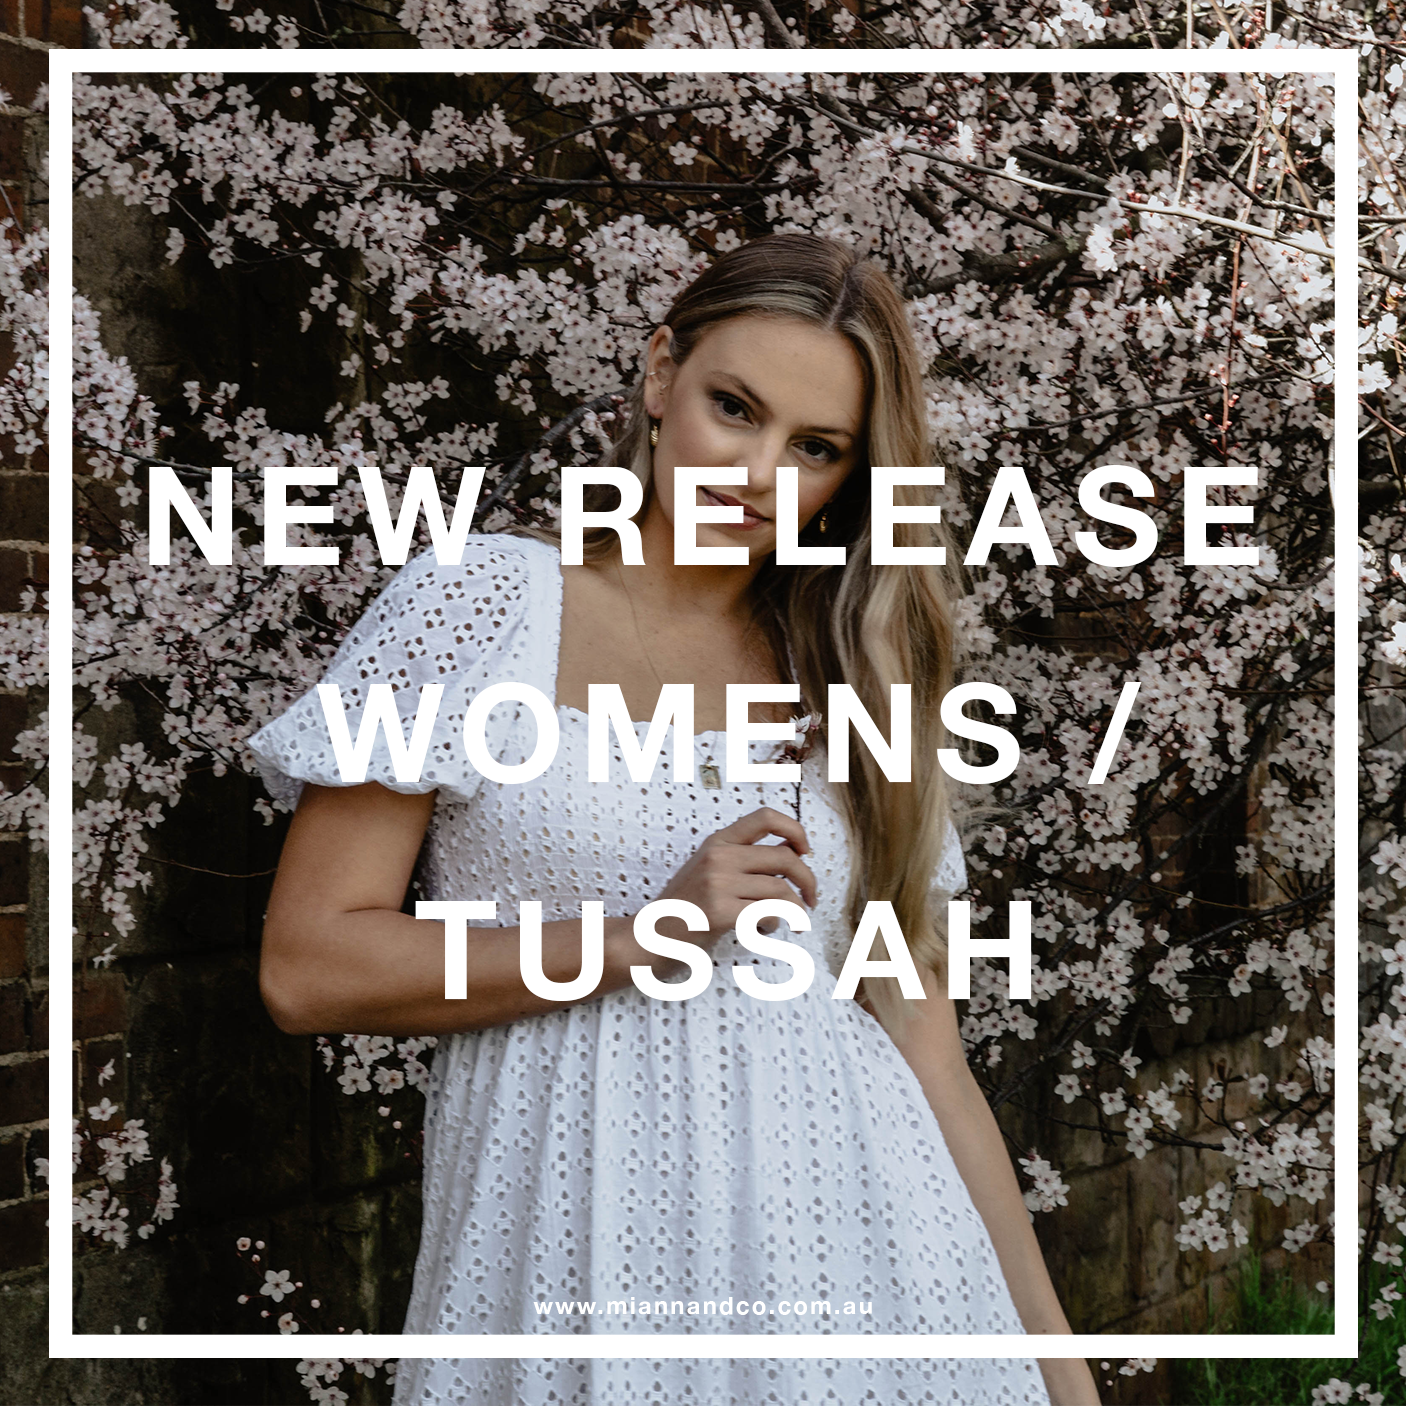 Miann and Co New Release Tussah